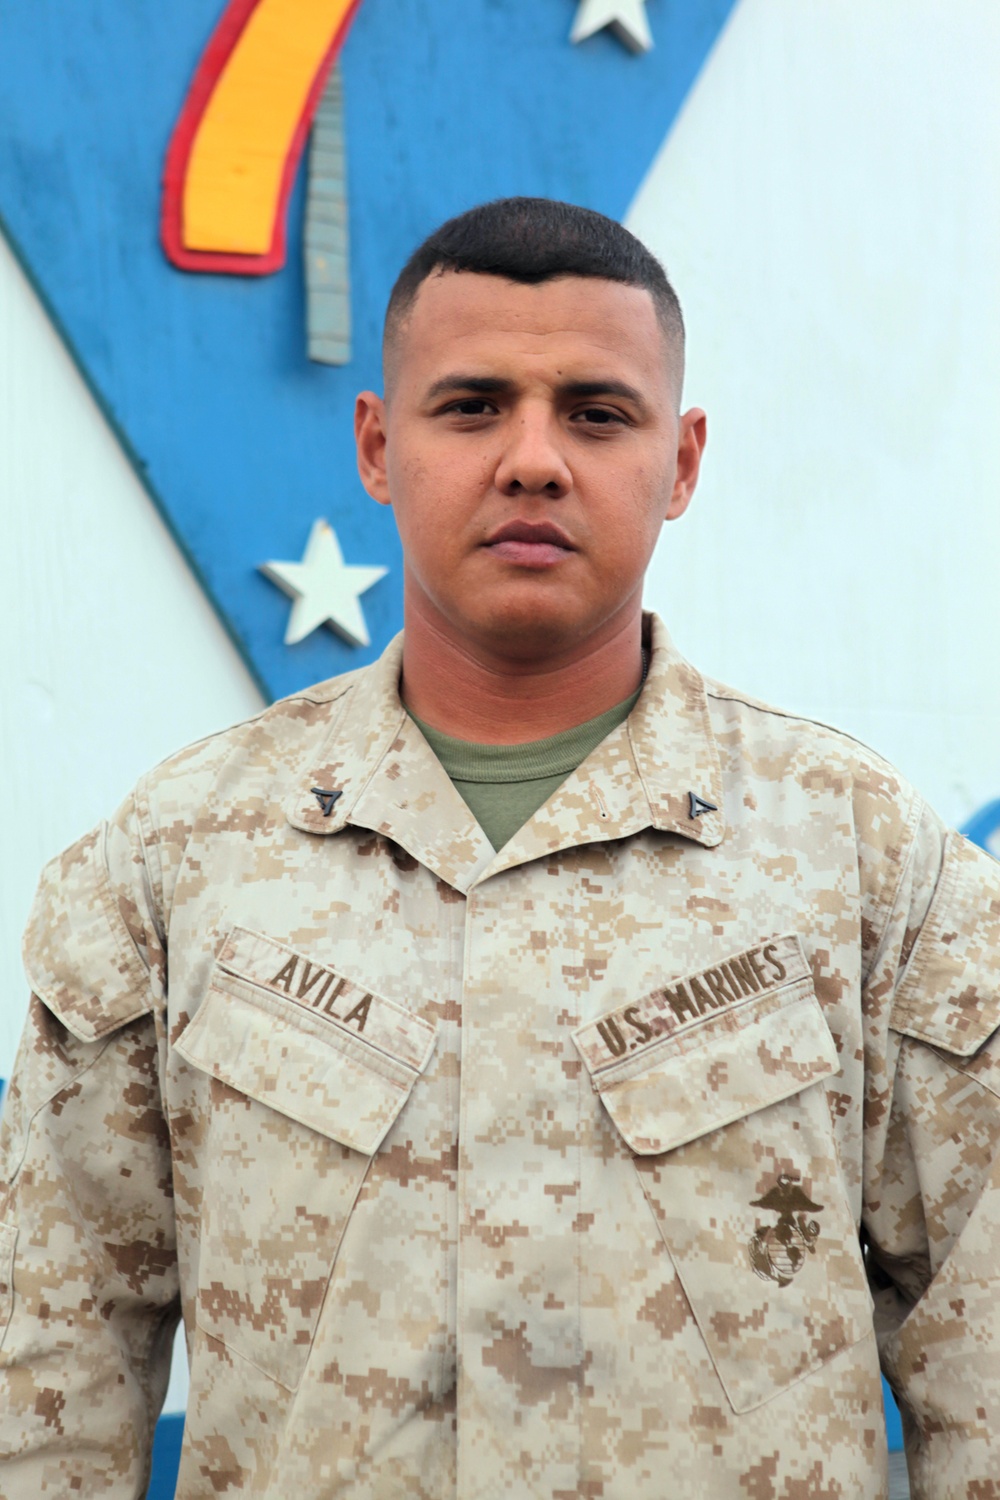 Path to higher education leads New York Marine to citizenship